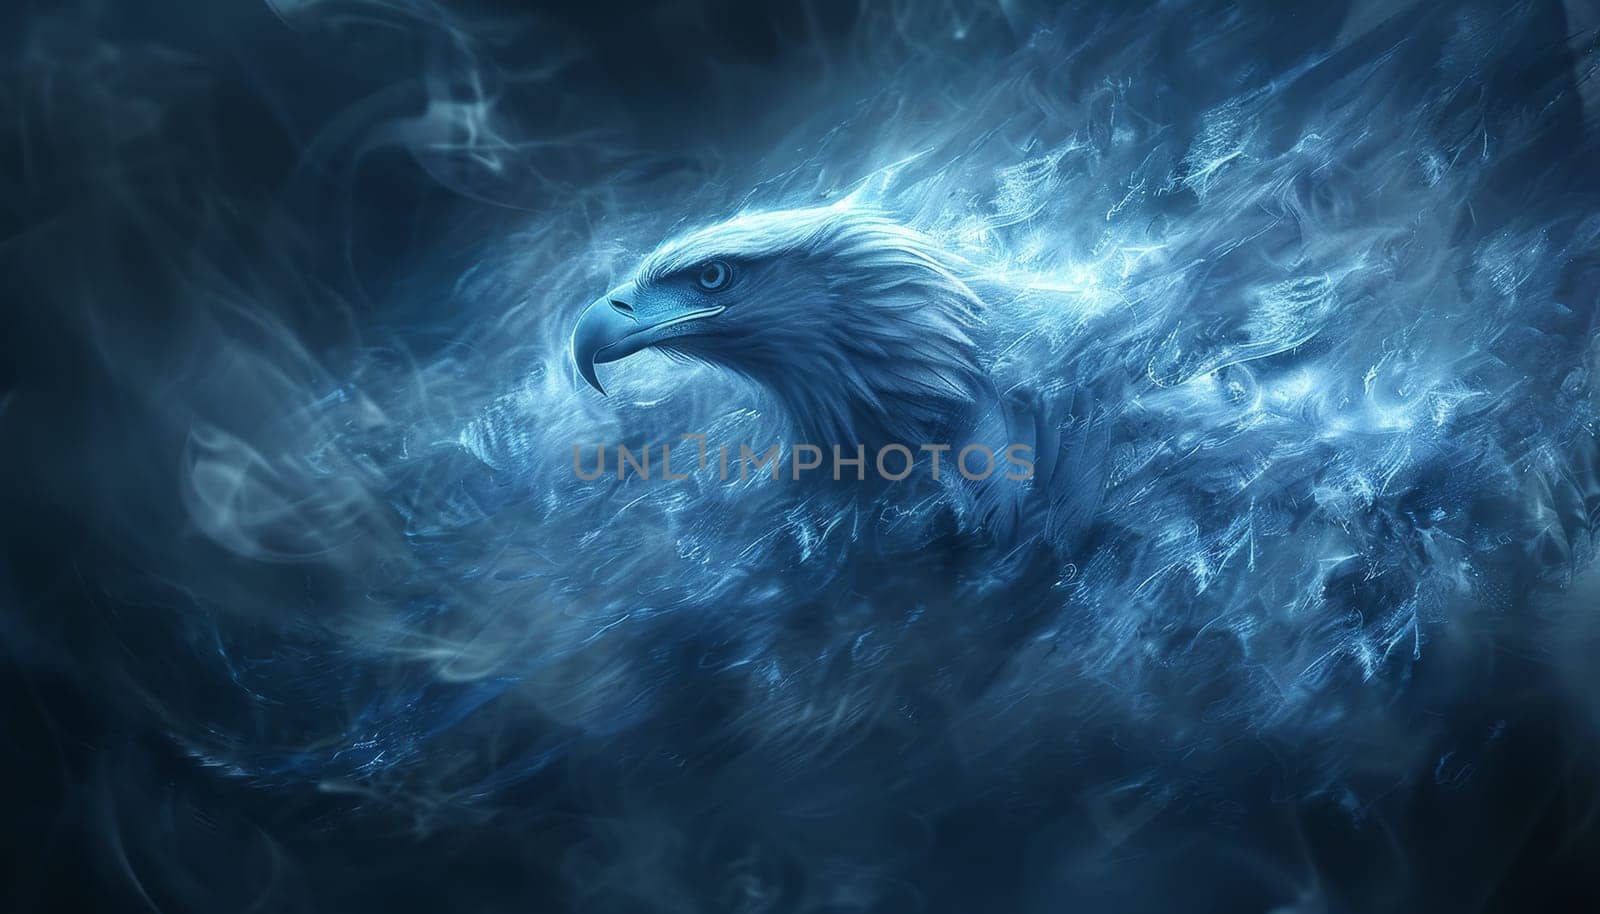 A blue eagle with smoke and water surrounding it by AI generated image.